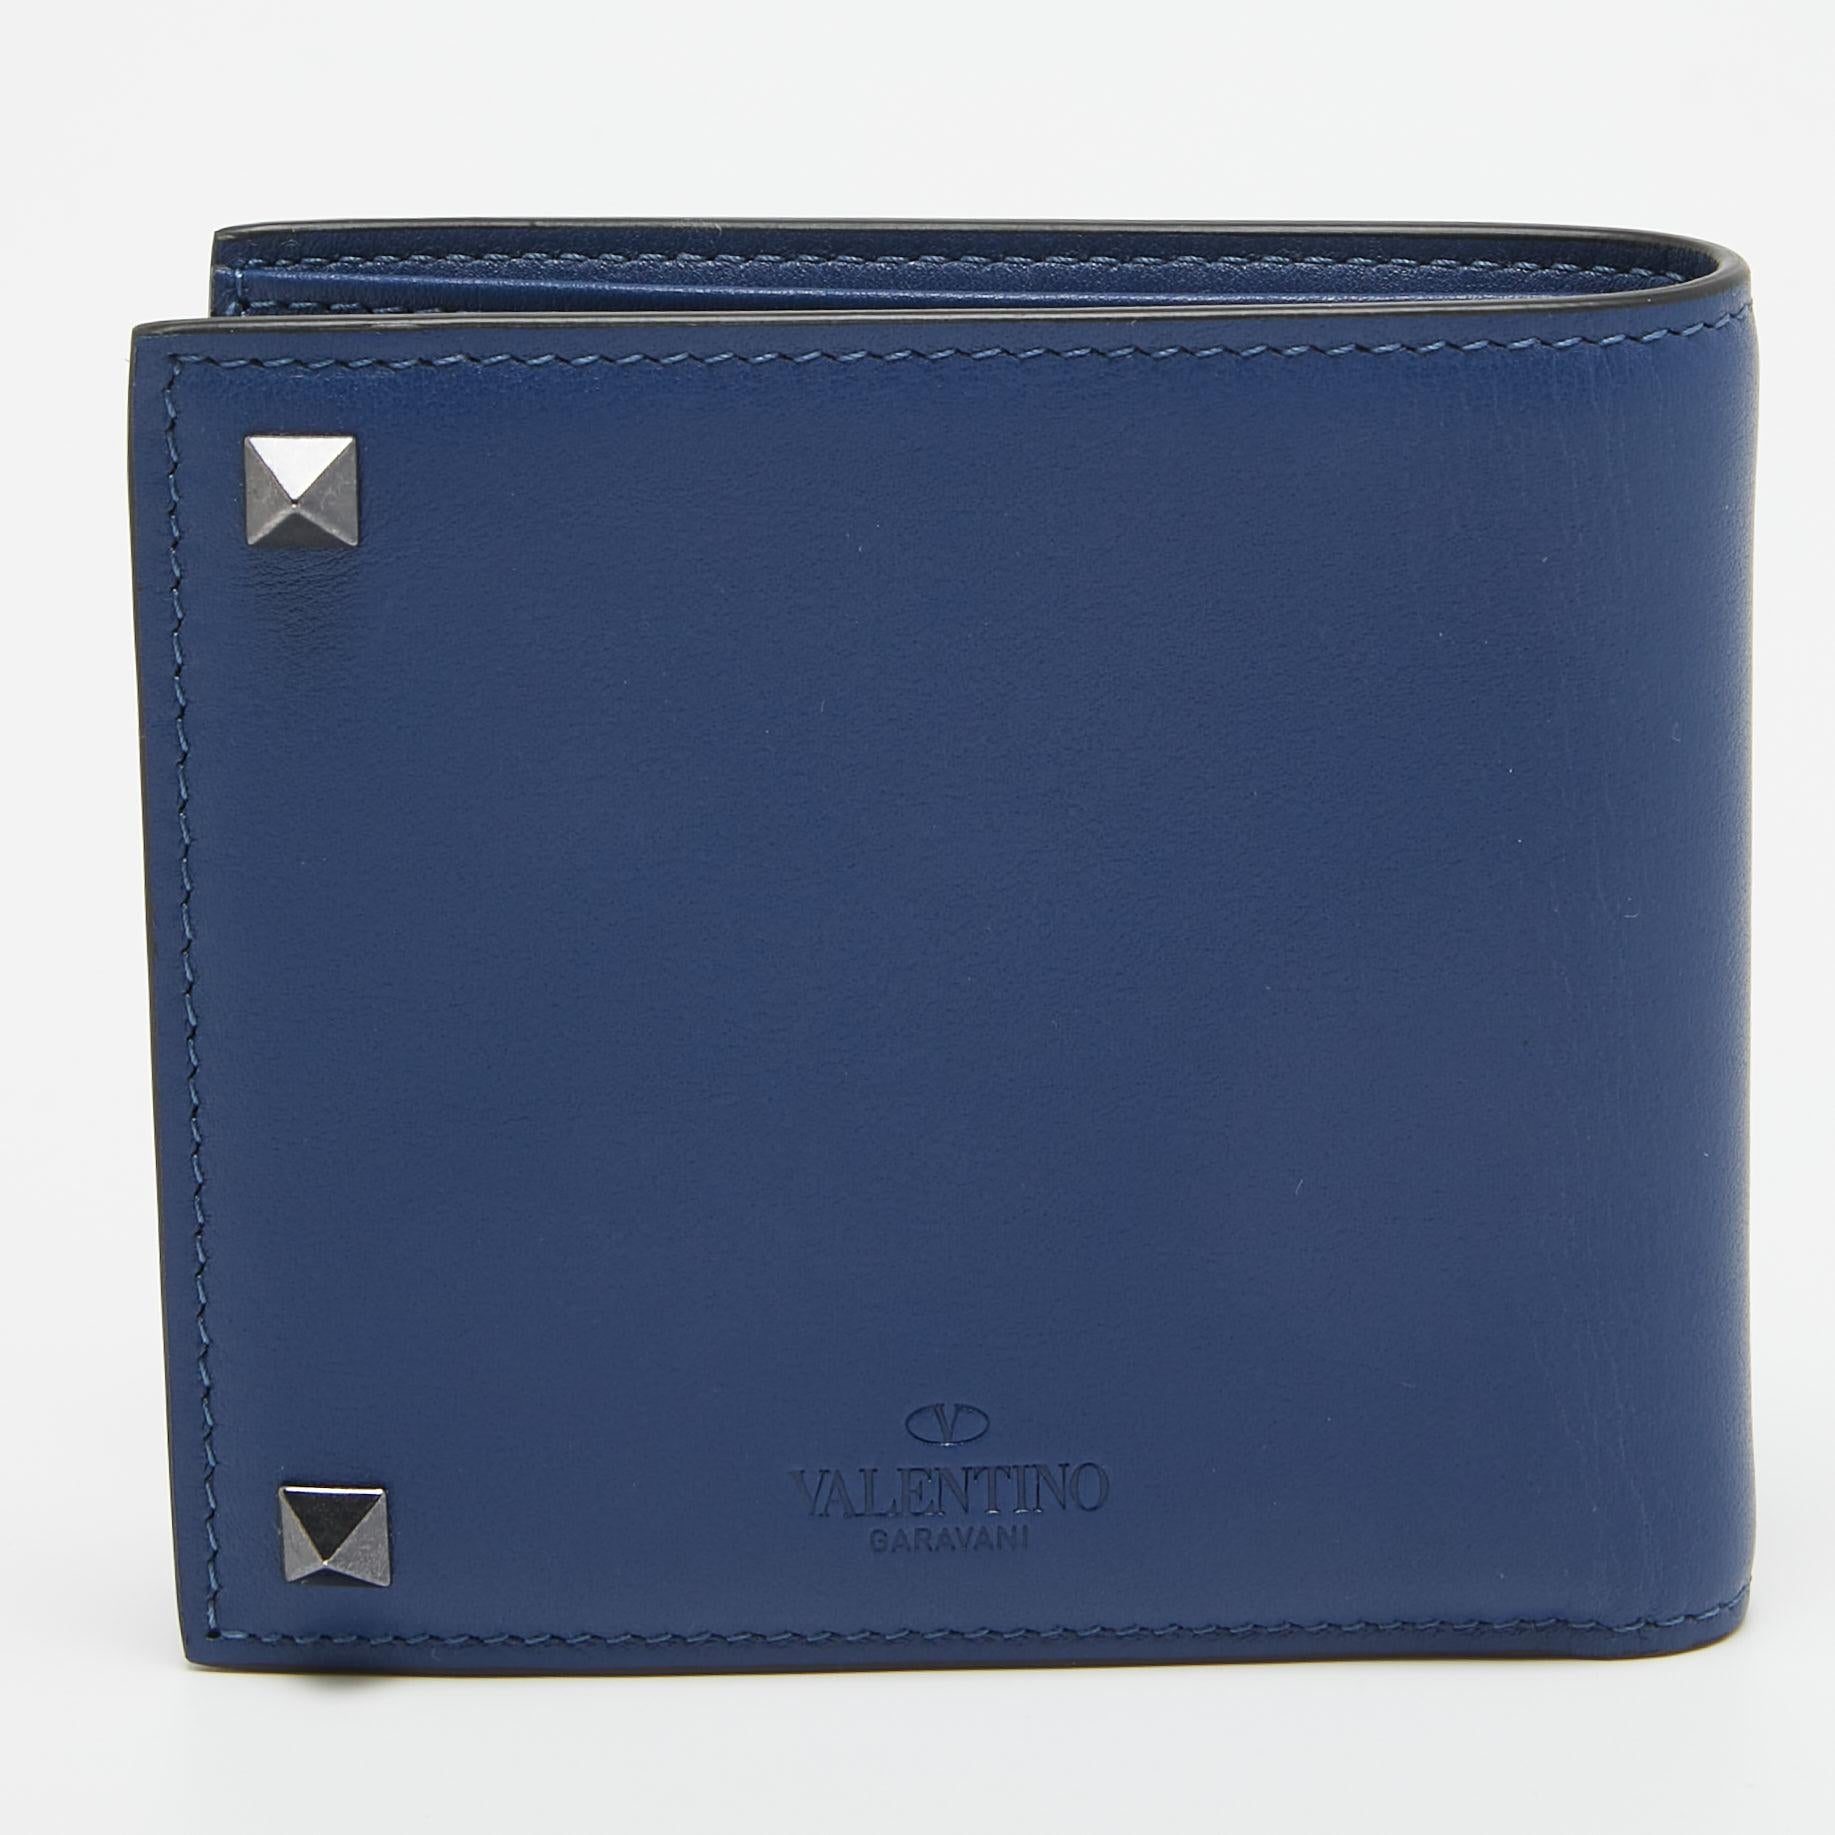 Valentino's Rockstuds takes inspiration from the frames of Roman doors; a signature detail that adorns this navy blue wallet. Made in Italy from leather that ages beautifully, it's crafted with a press-stud fastening that opens to reveal card slots